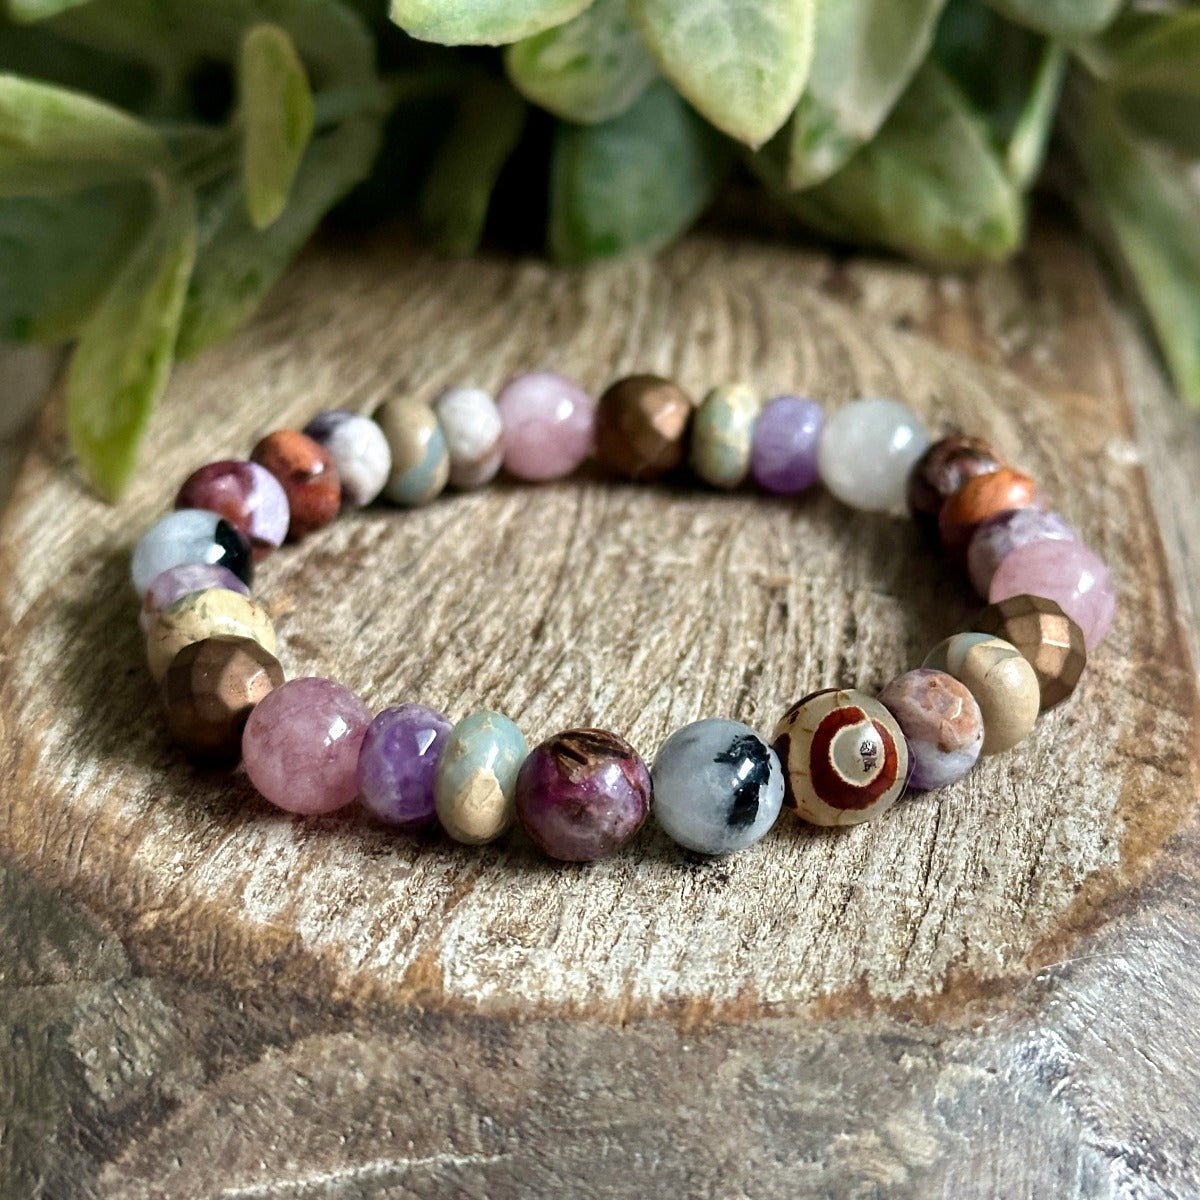 7 Chakra Aromatherapy Bracelet Stack - 8 mm - Healing Stones for You